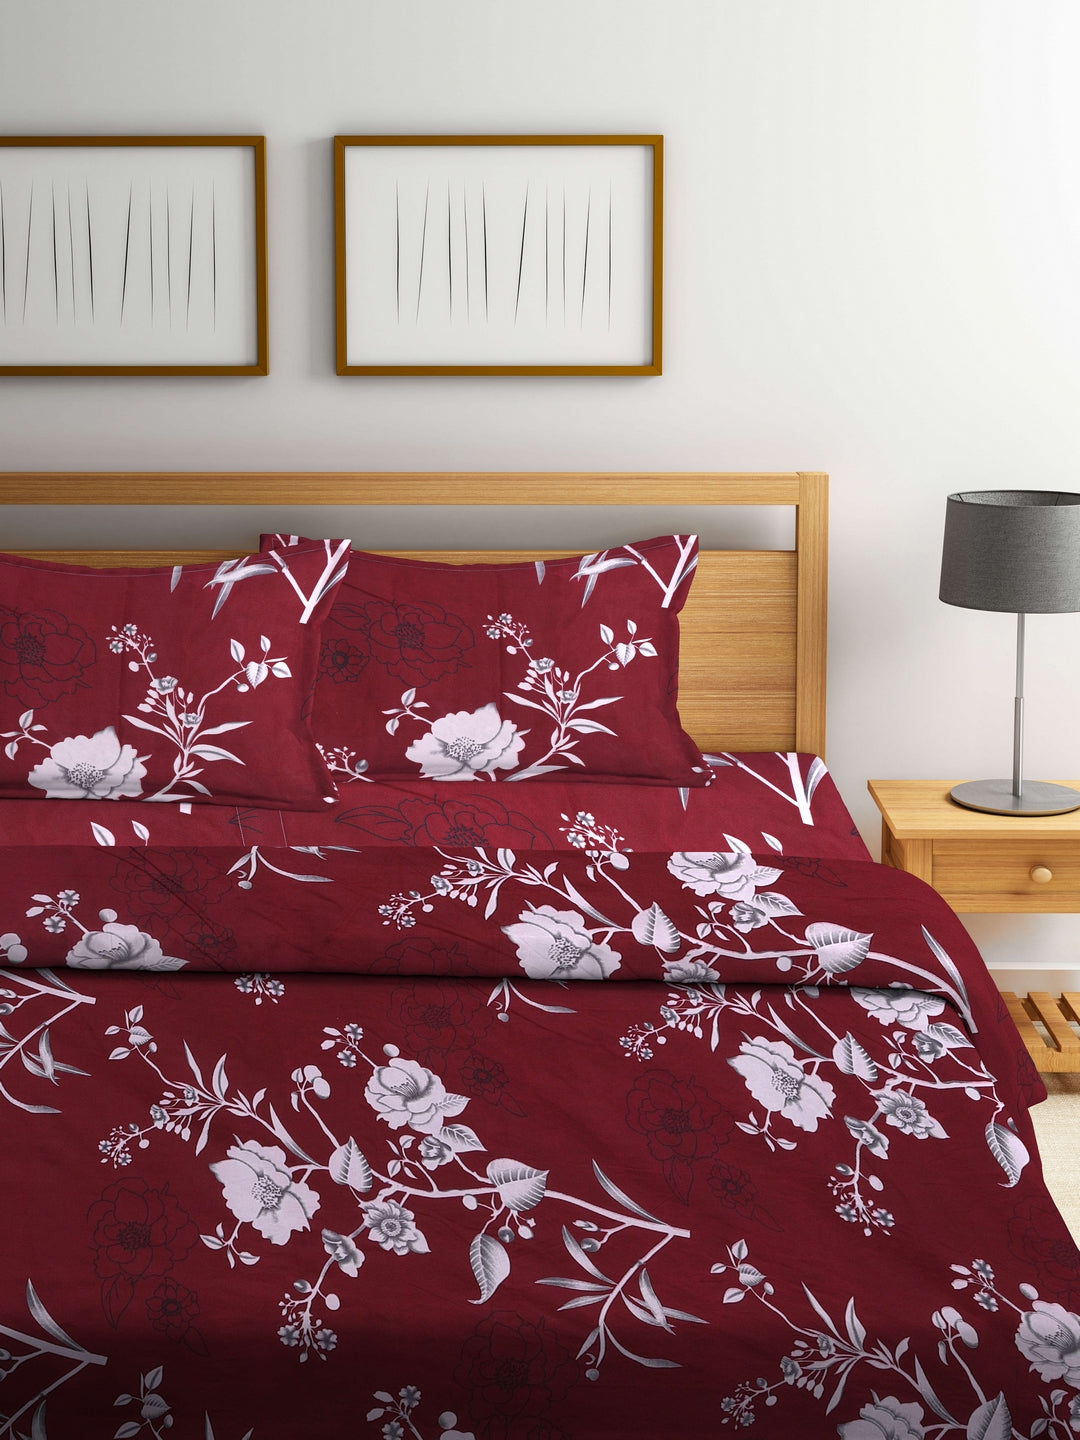 Arrabi Red Floral TC Cotton Blend Double Size Comforter Bedding Set with 2 Pillow Cover